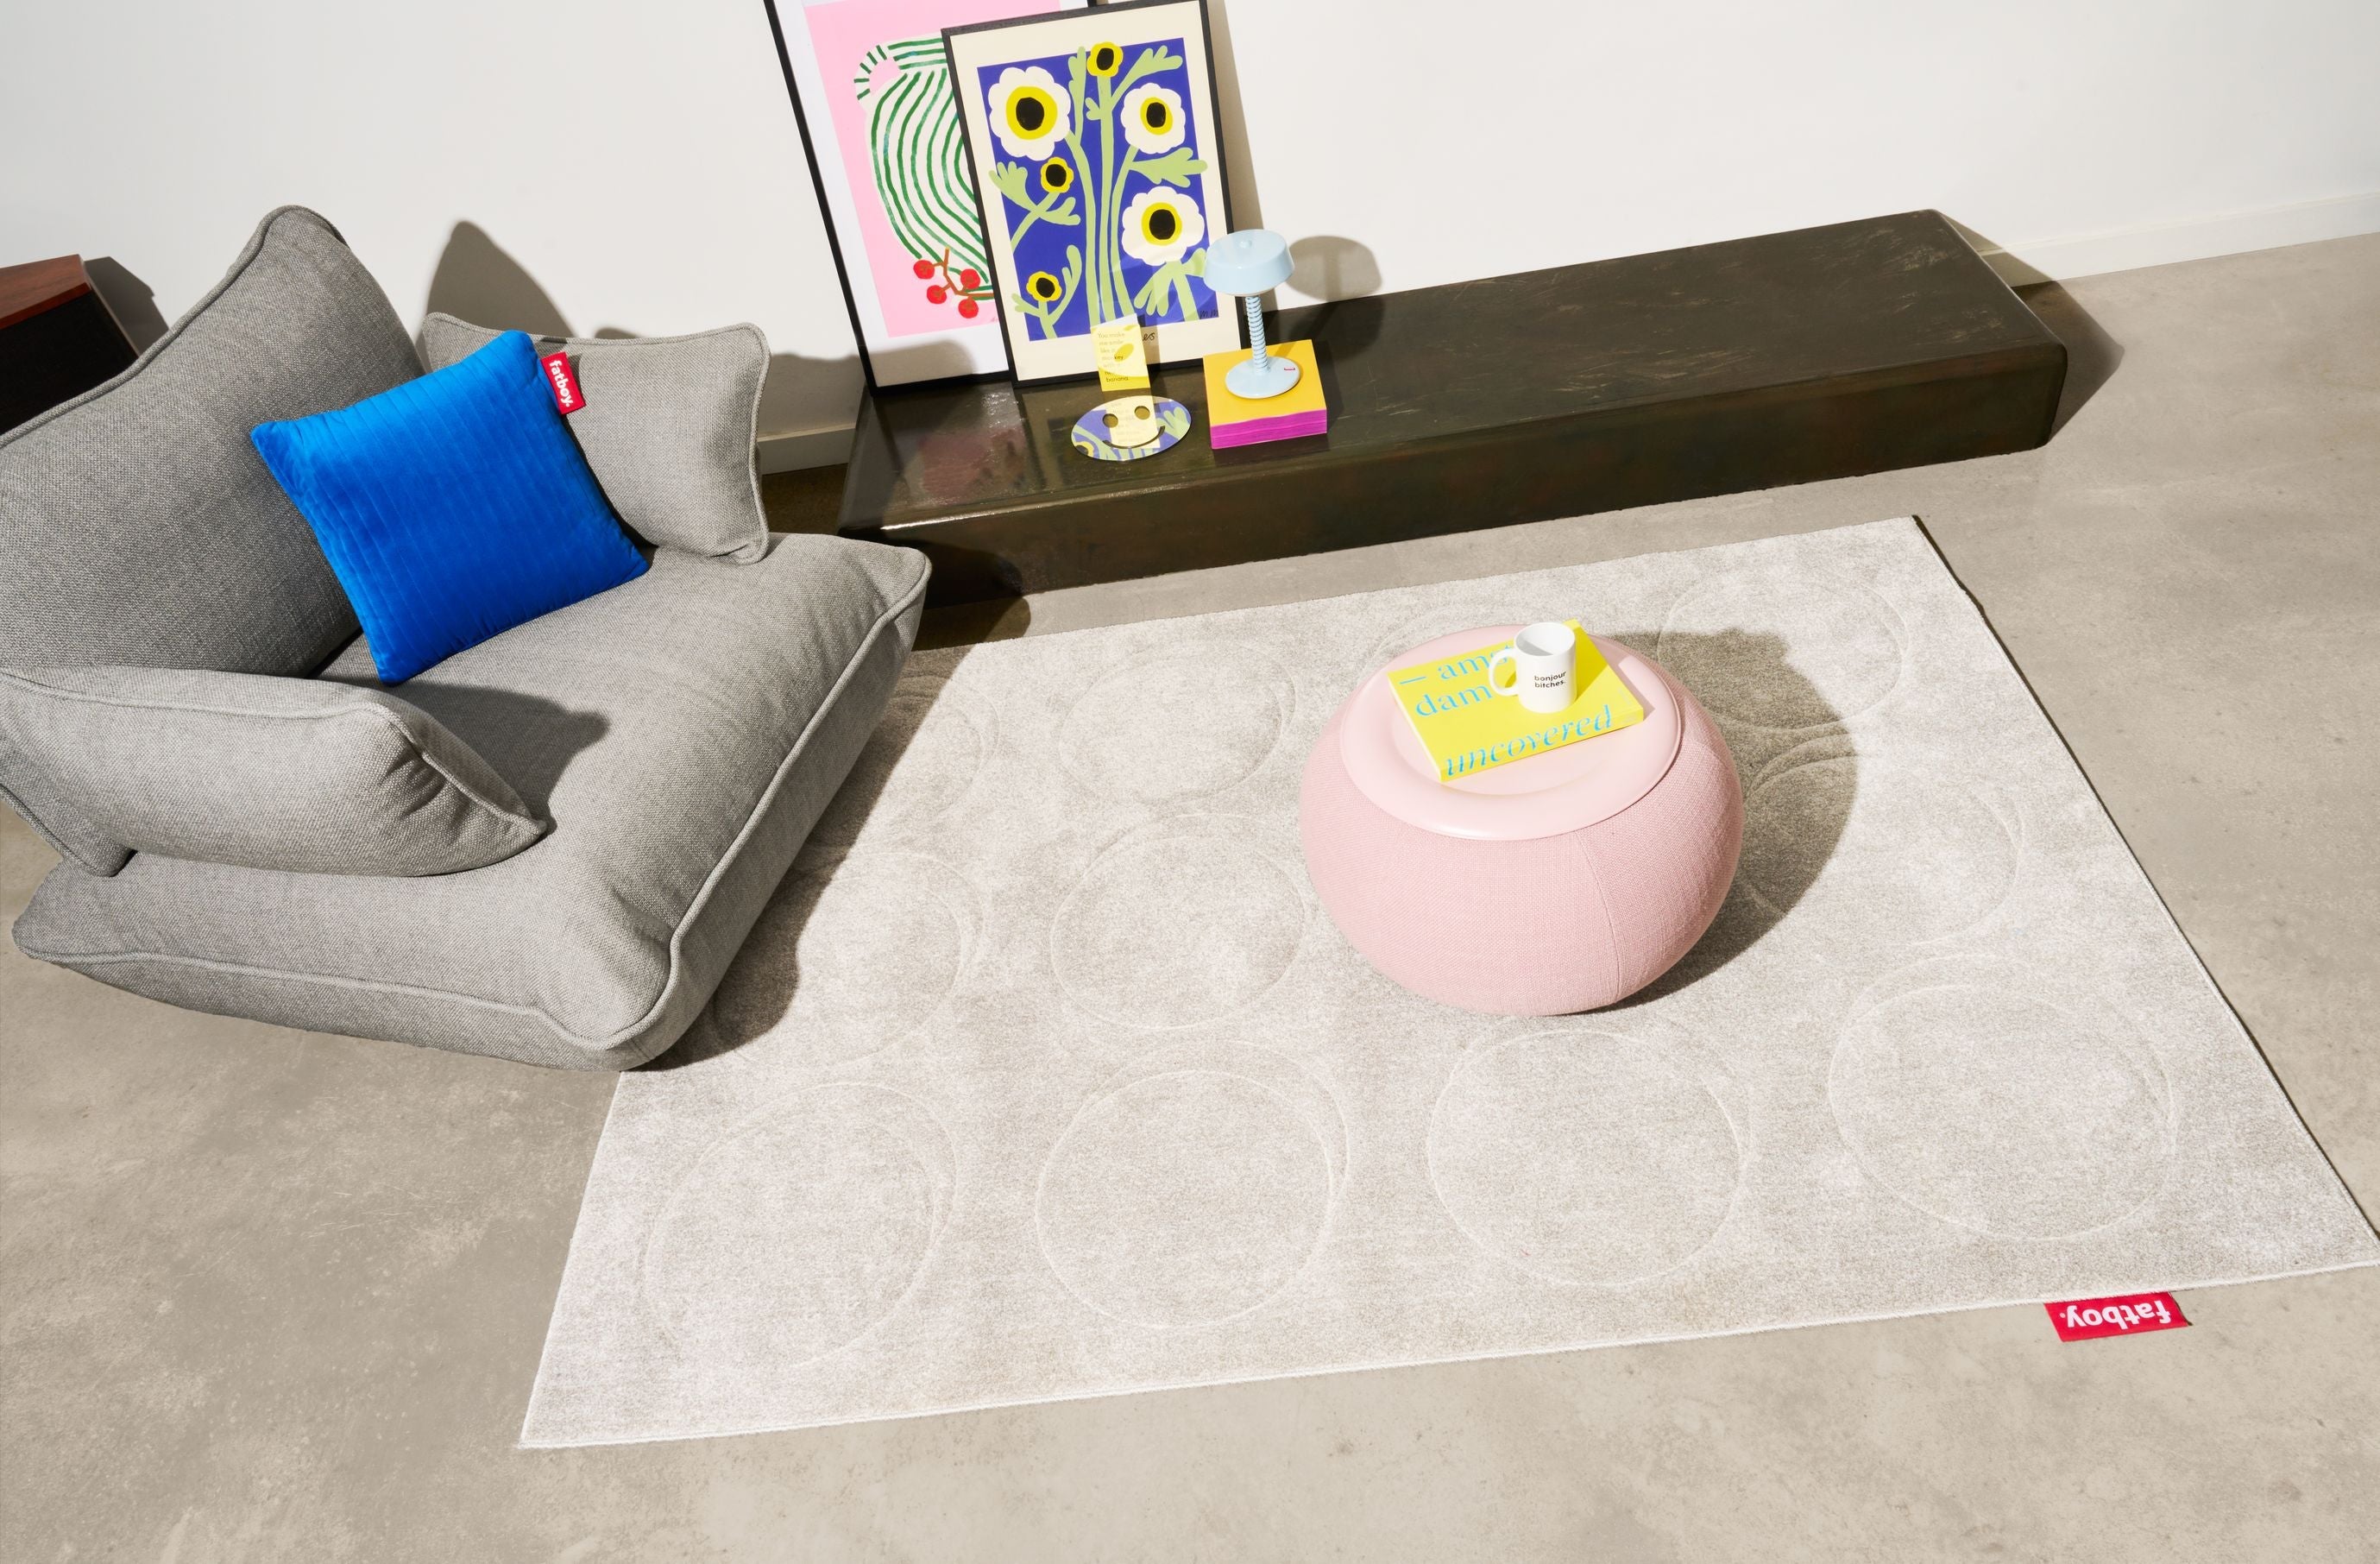 Fatboy Humpty Coffee Table, Bubble Pink